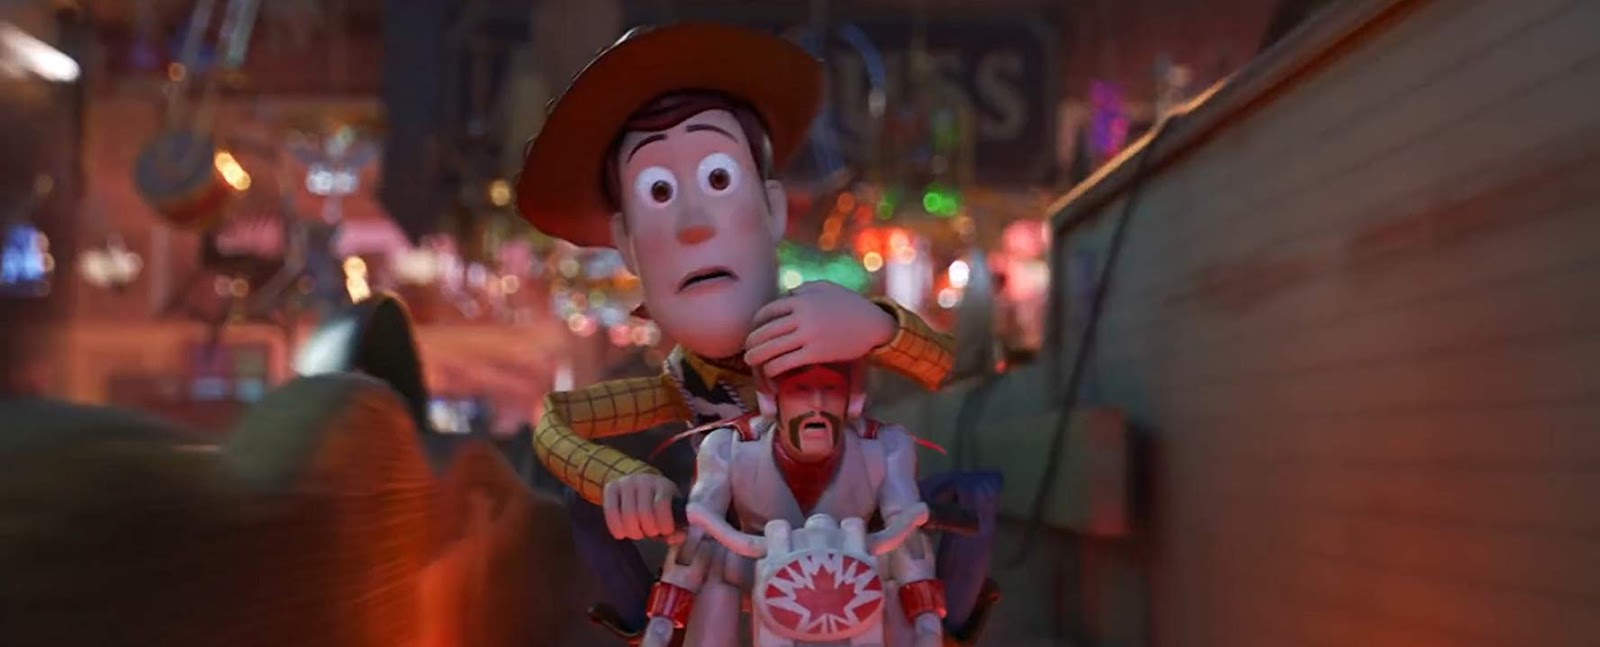 √ Download Toy Story 4 (2019) Sub Indo Full Movie